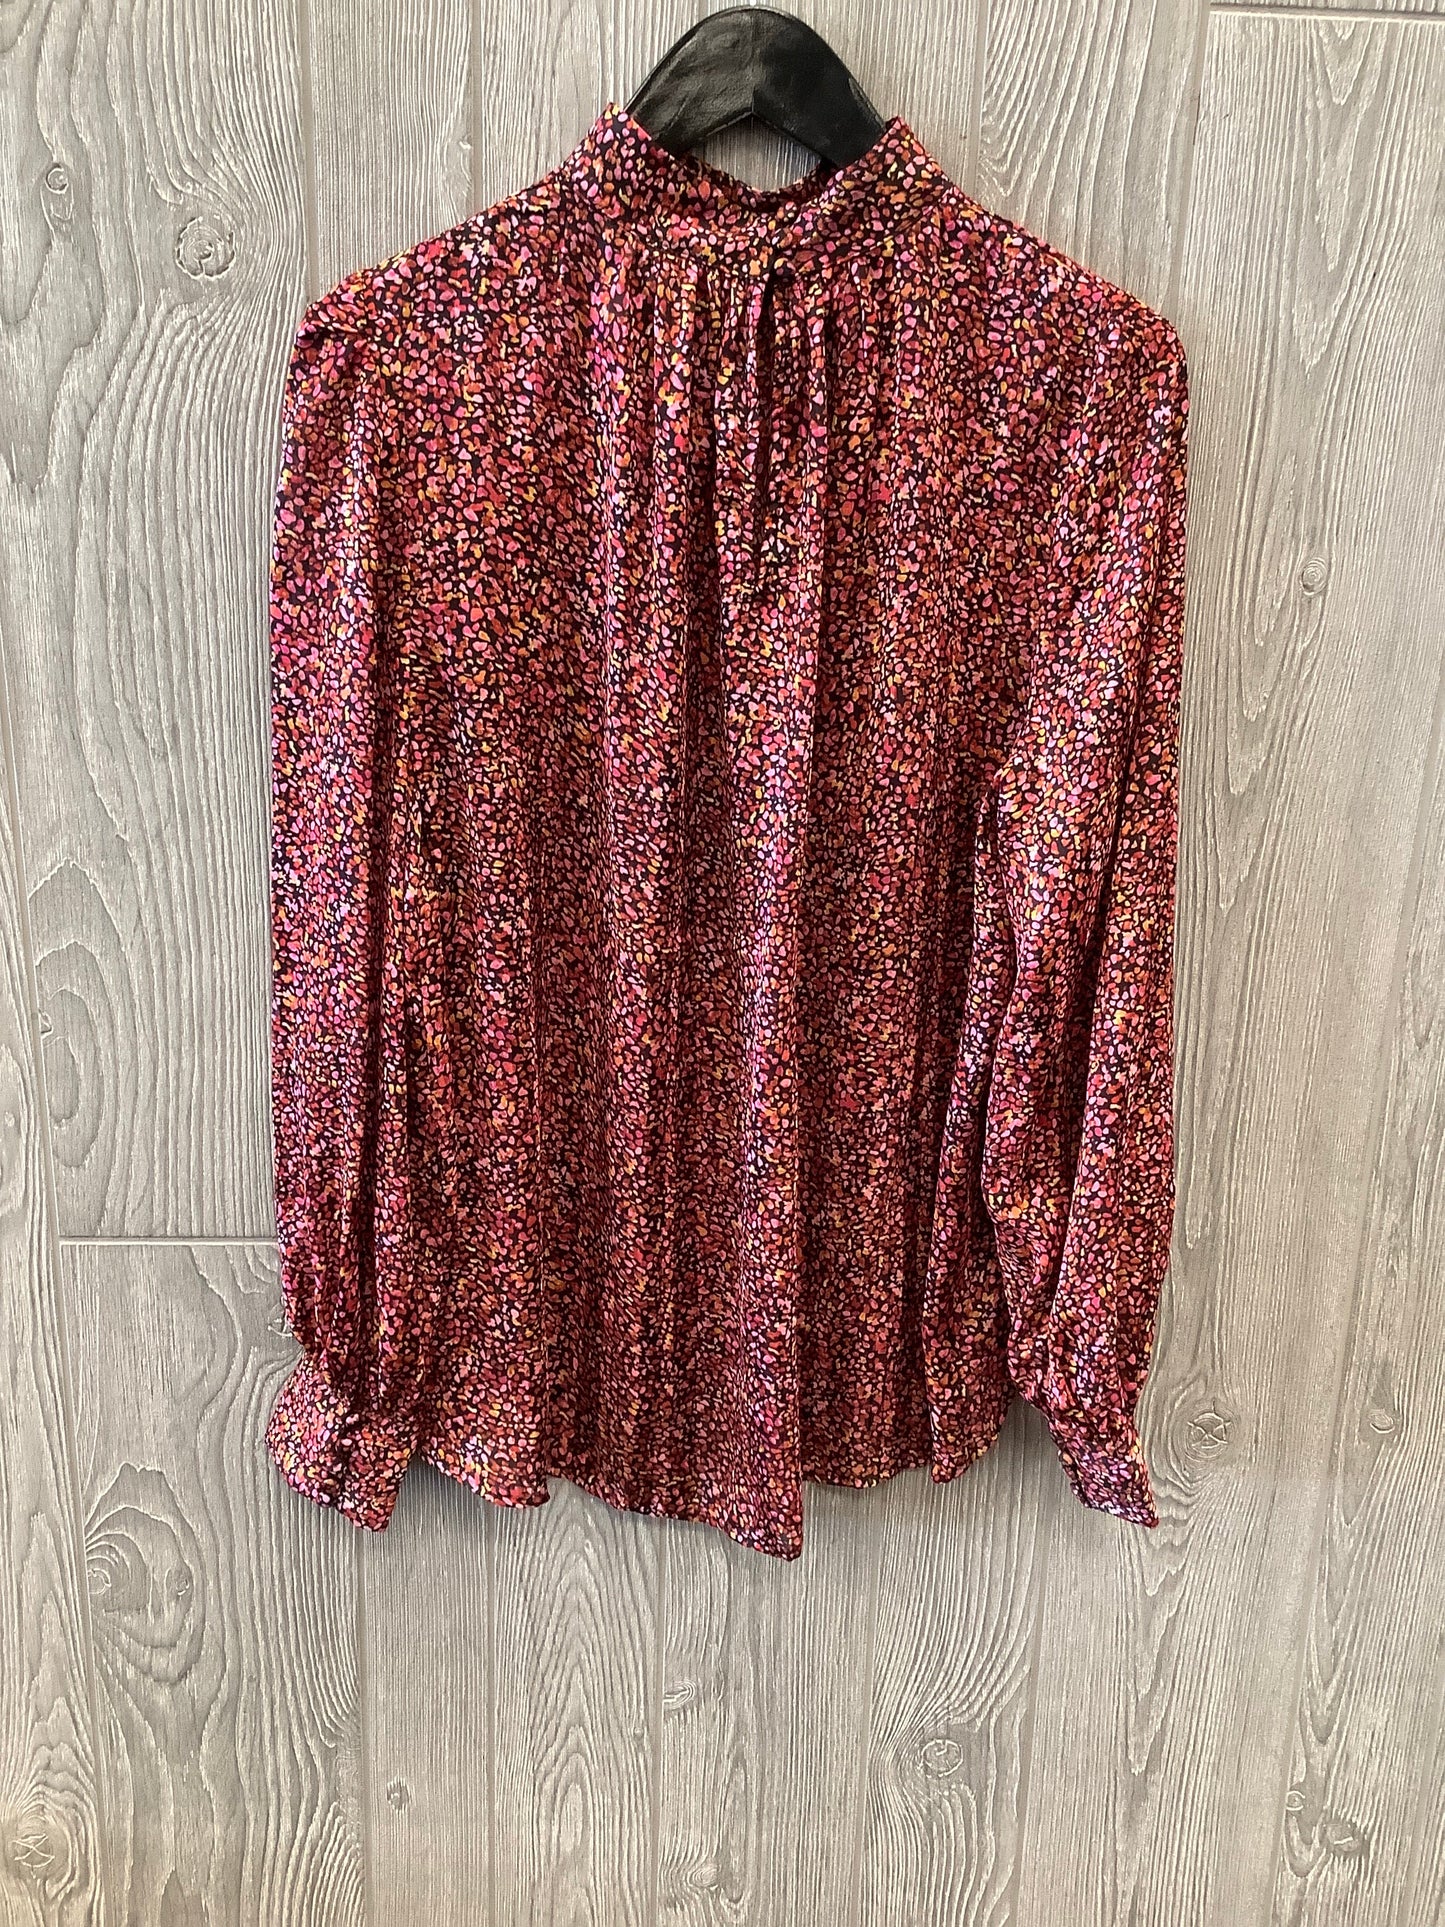 Floral Print Top Long Sleeve H&m, Size M